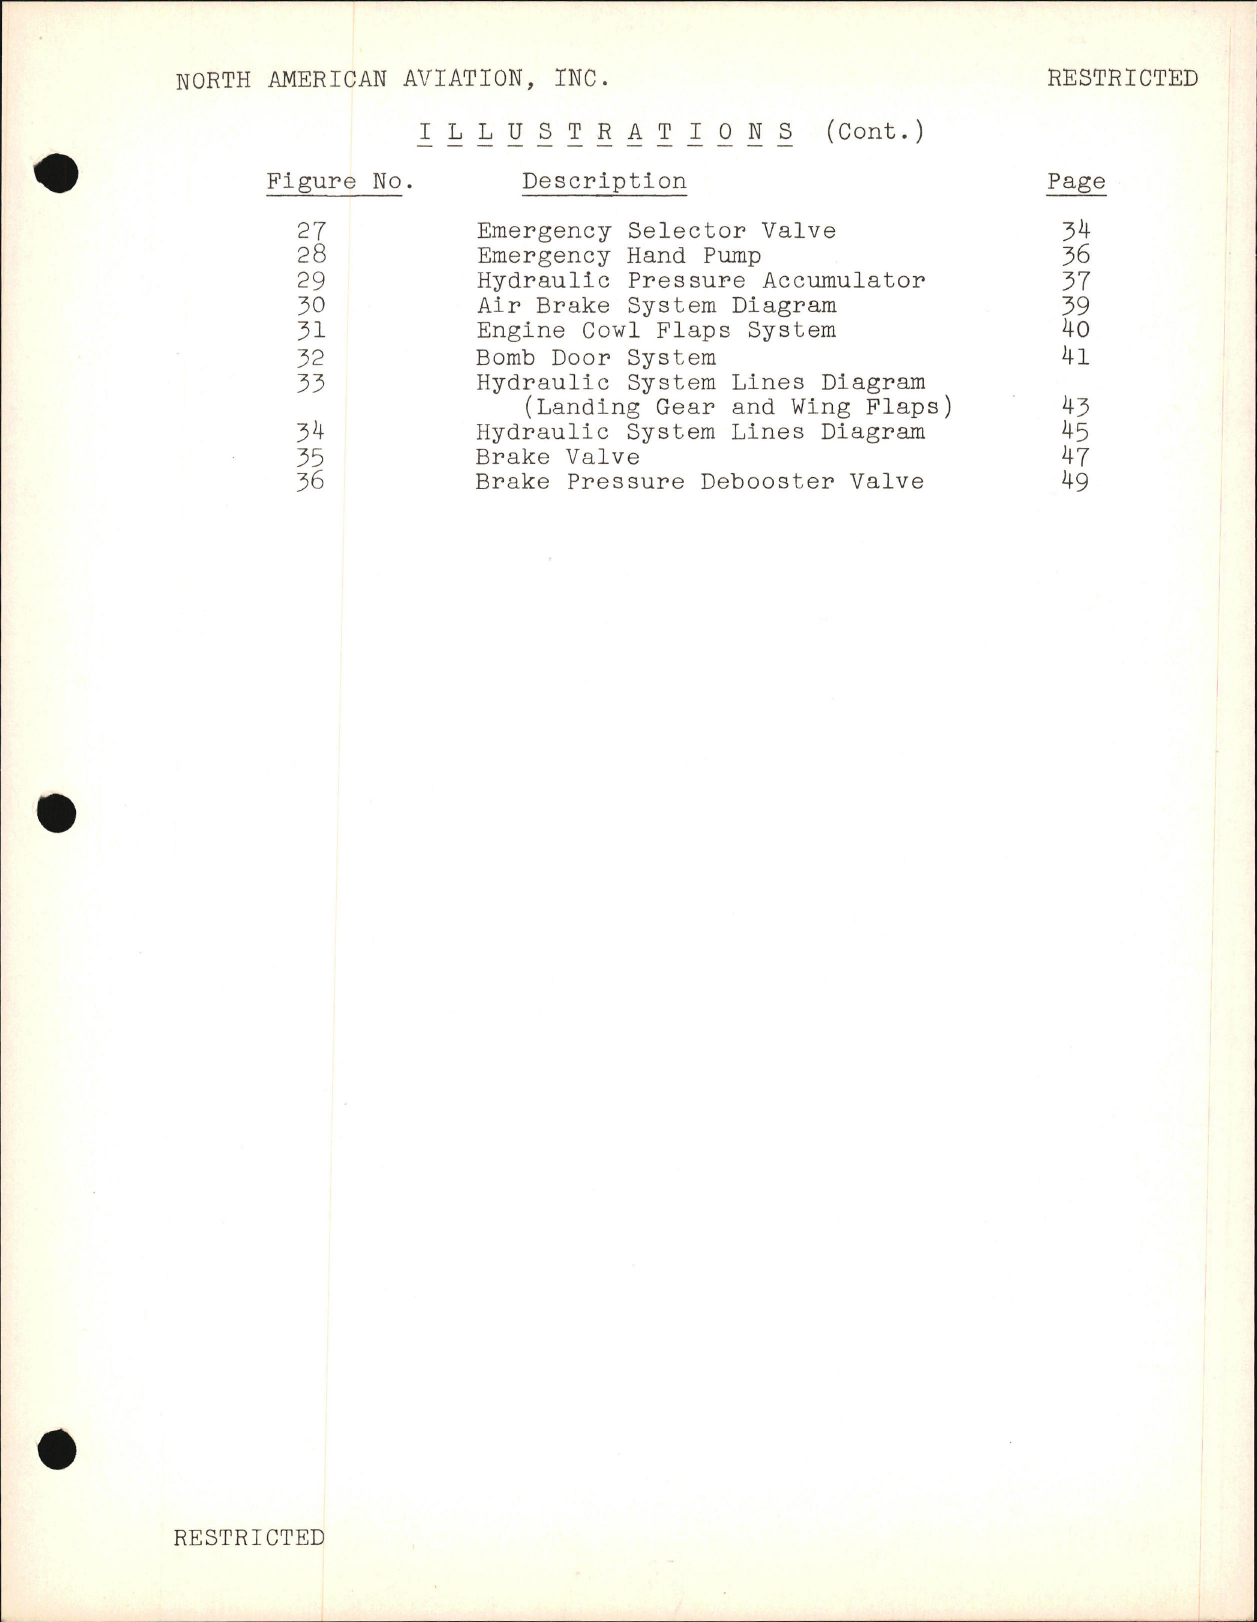 Sample page 5 from AirCorps Library document: Service School Lectures - Hydraulic Install